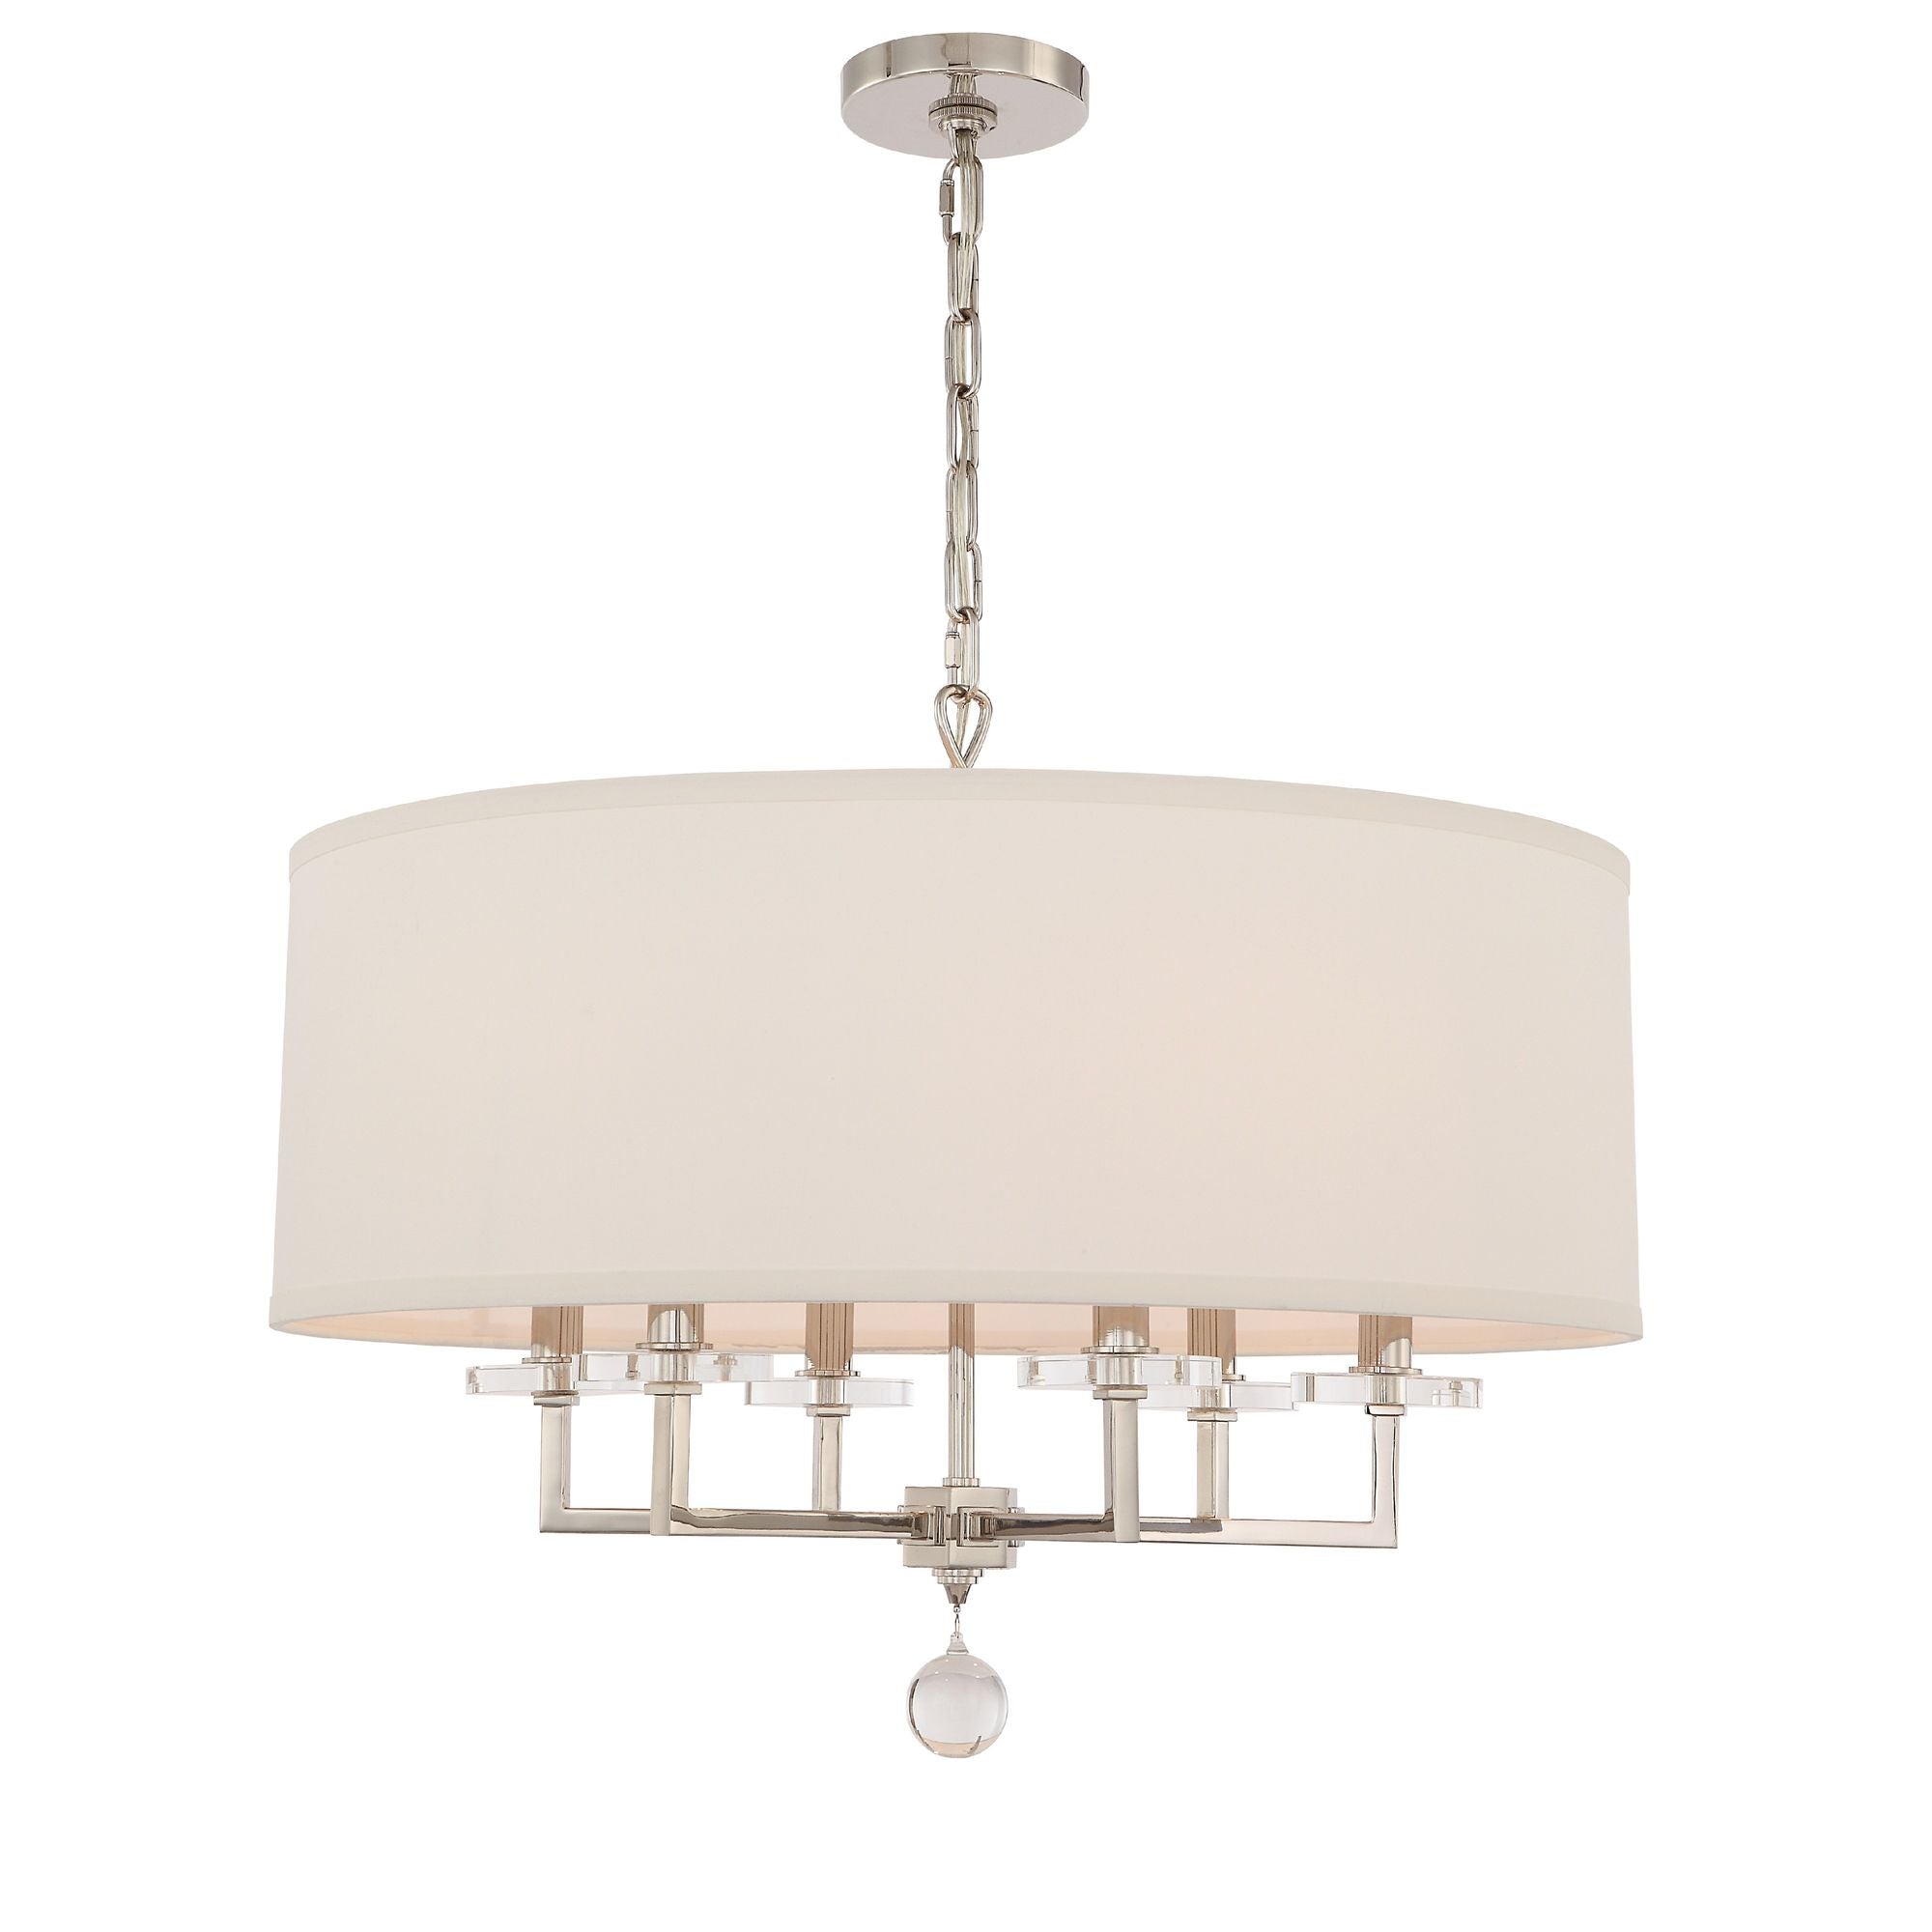 Paxton 6 Light Polished Nickel Chandelier